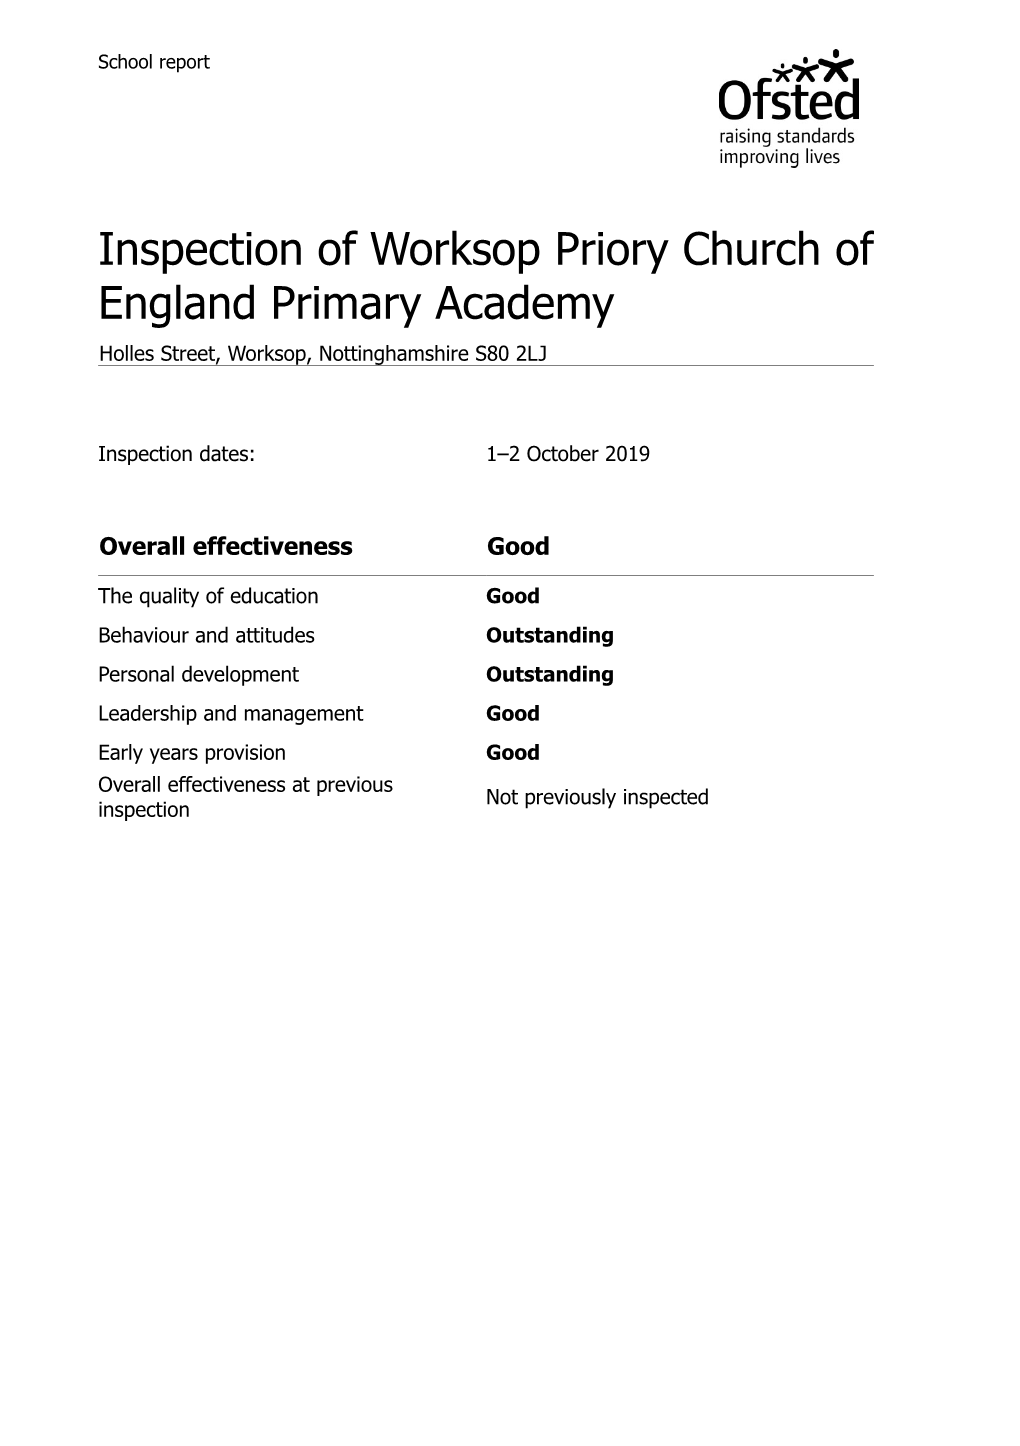 Inspection of Worksop Priory Church of England Primary Academy Holles Street, Worksop, Nottinghamshire S80 2LJ